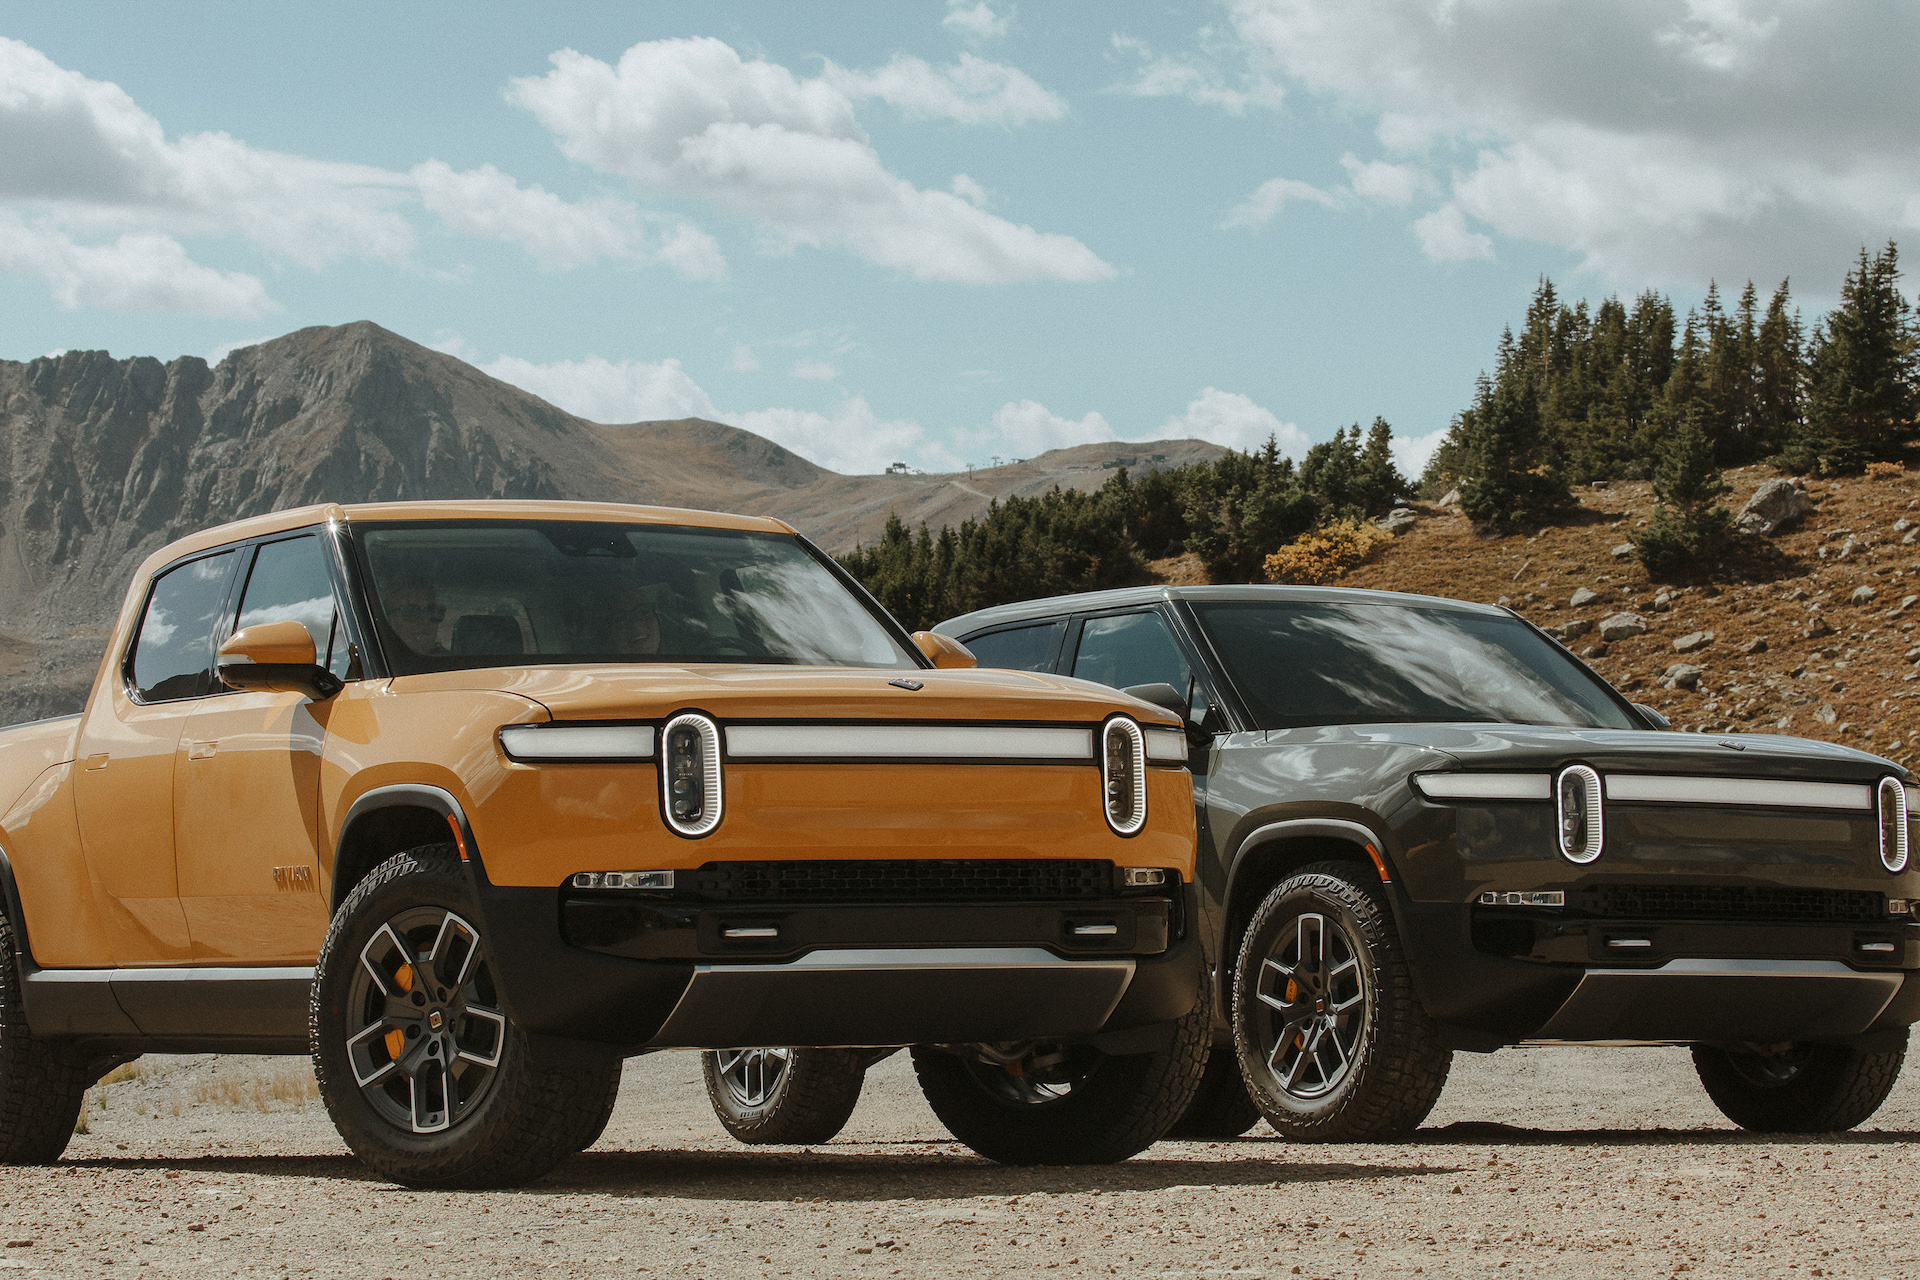 Rivian R1T pickup deliveries delayed to Sept. 2021, R1S SUV to follow